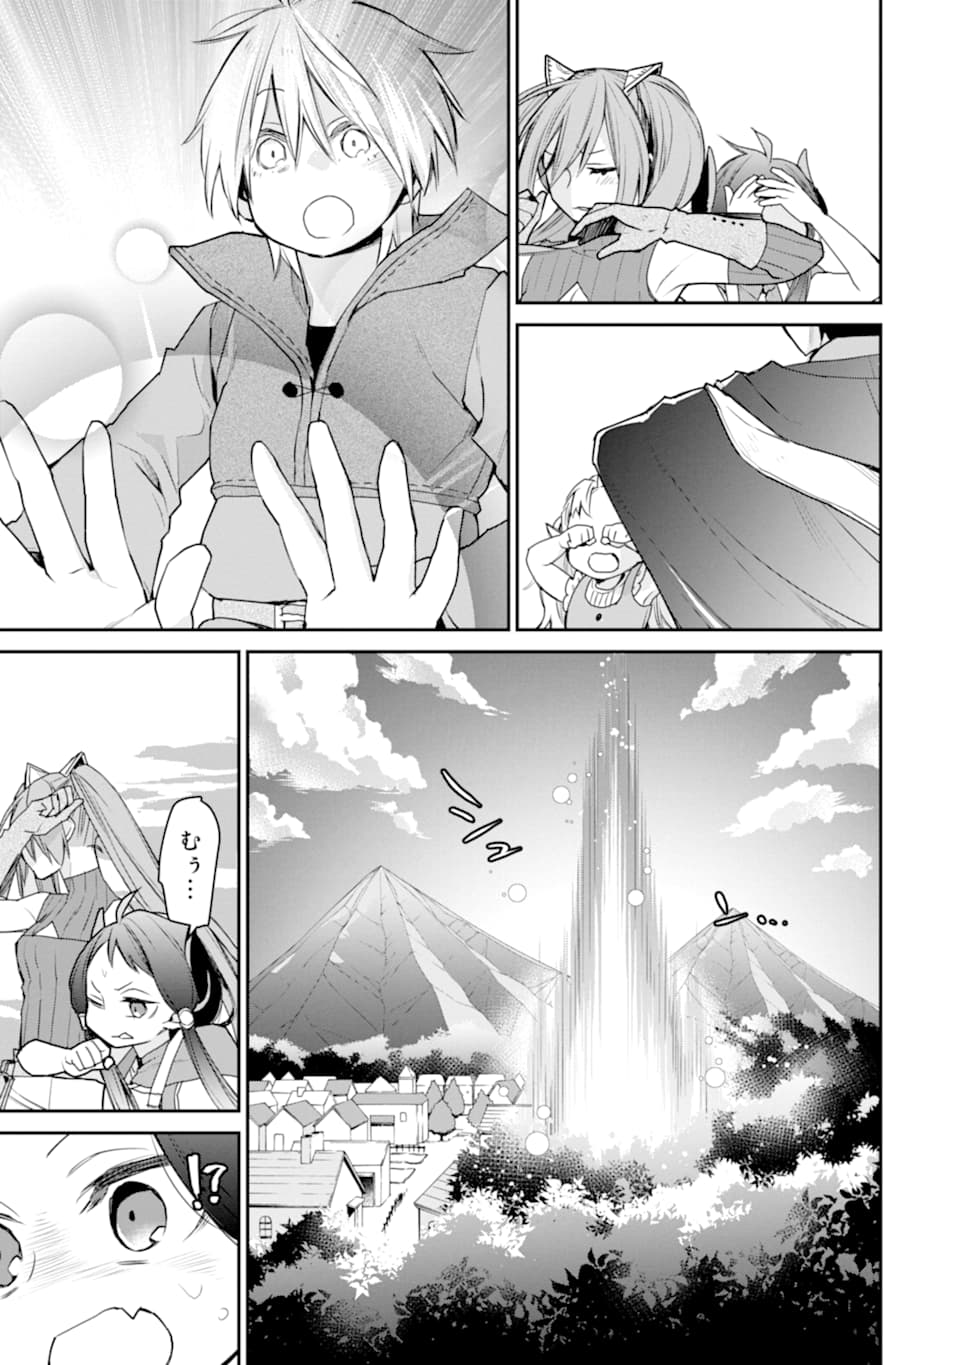 The Strongest Wizard Becomes a Countryside Guardsman After Taking an Arrow to the Knee - Chapter 18 - Page 7